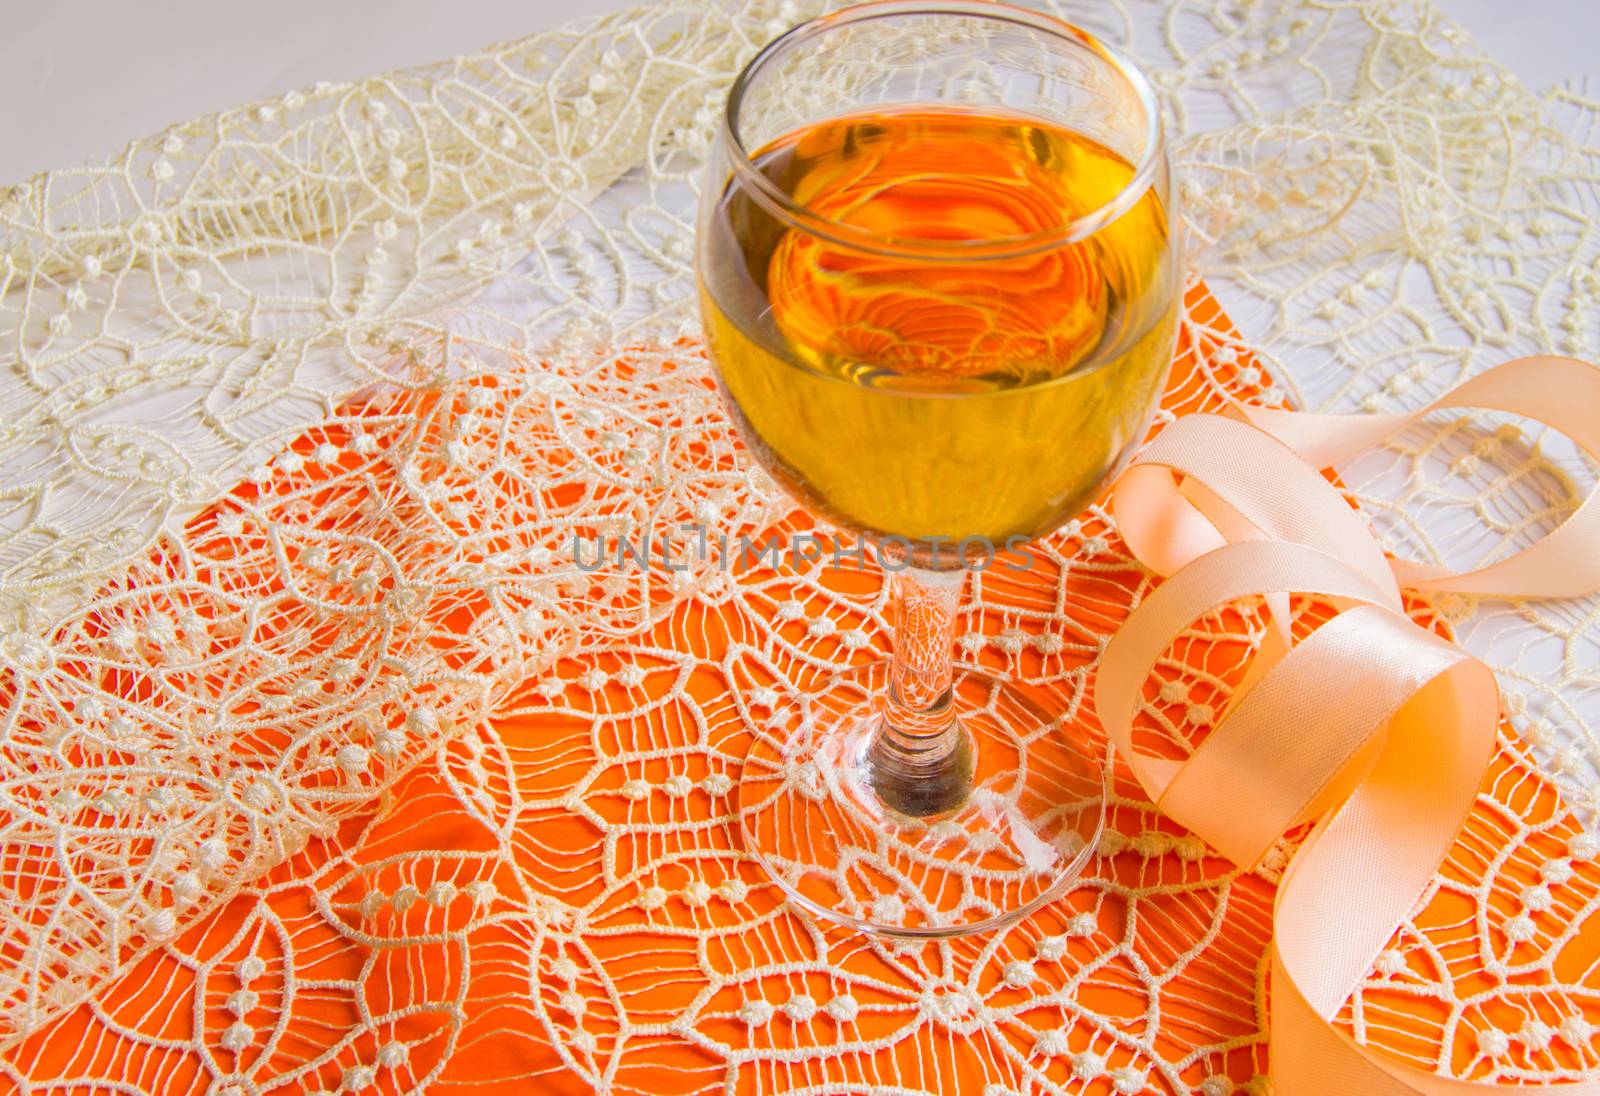 Flat stacking of white wine in a glass, beige lace and decorative ribbon, orange background, top view. Romantic spring or summer horizontal composition. Selective focus.